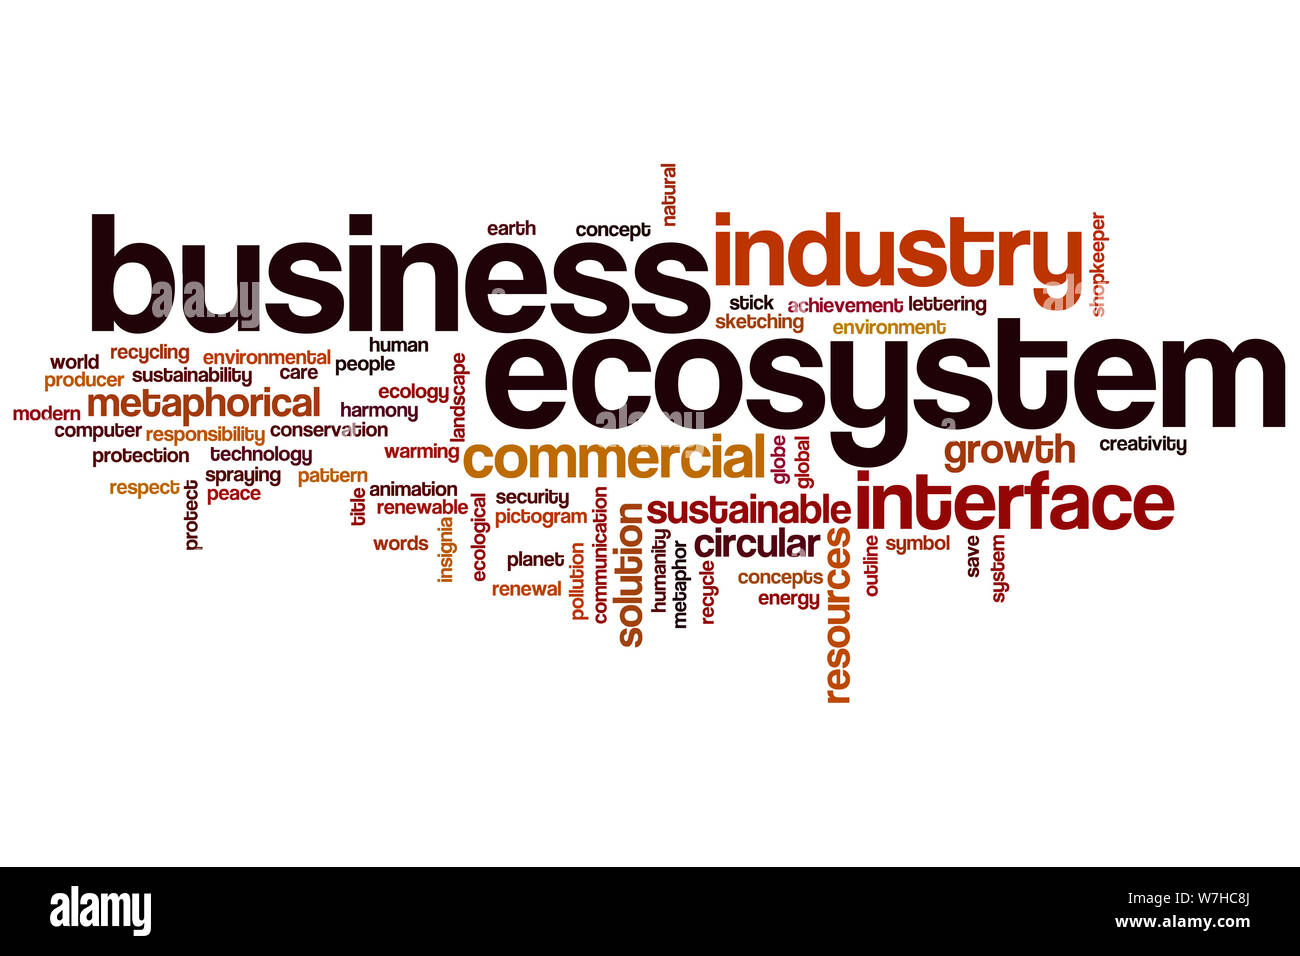 Business ecosystem word cloud concept Stock Photo